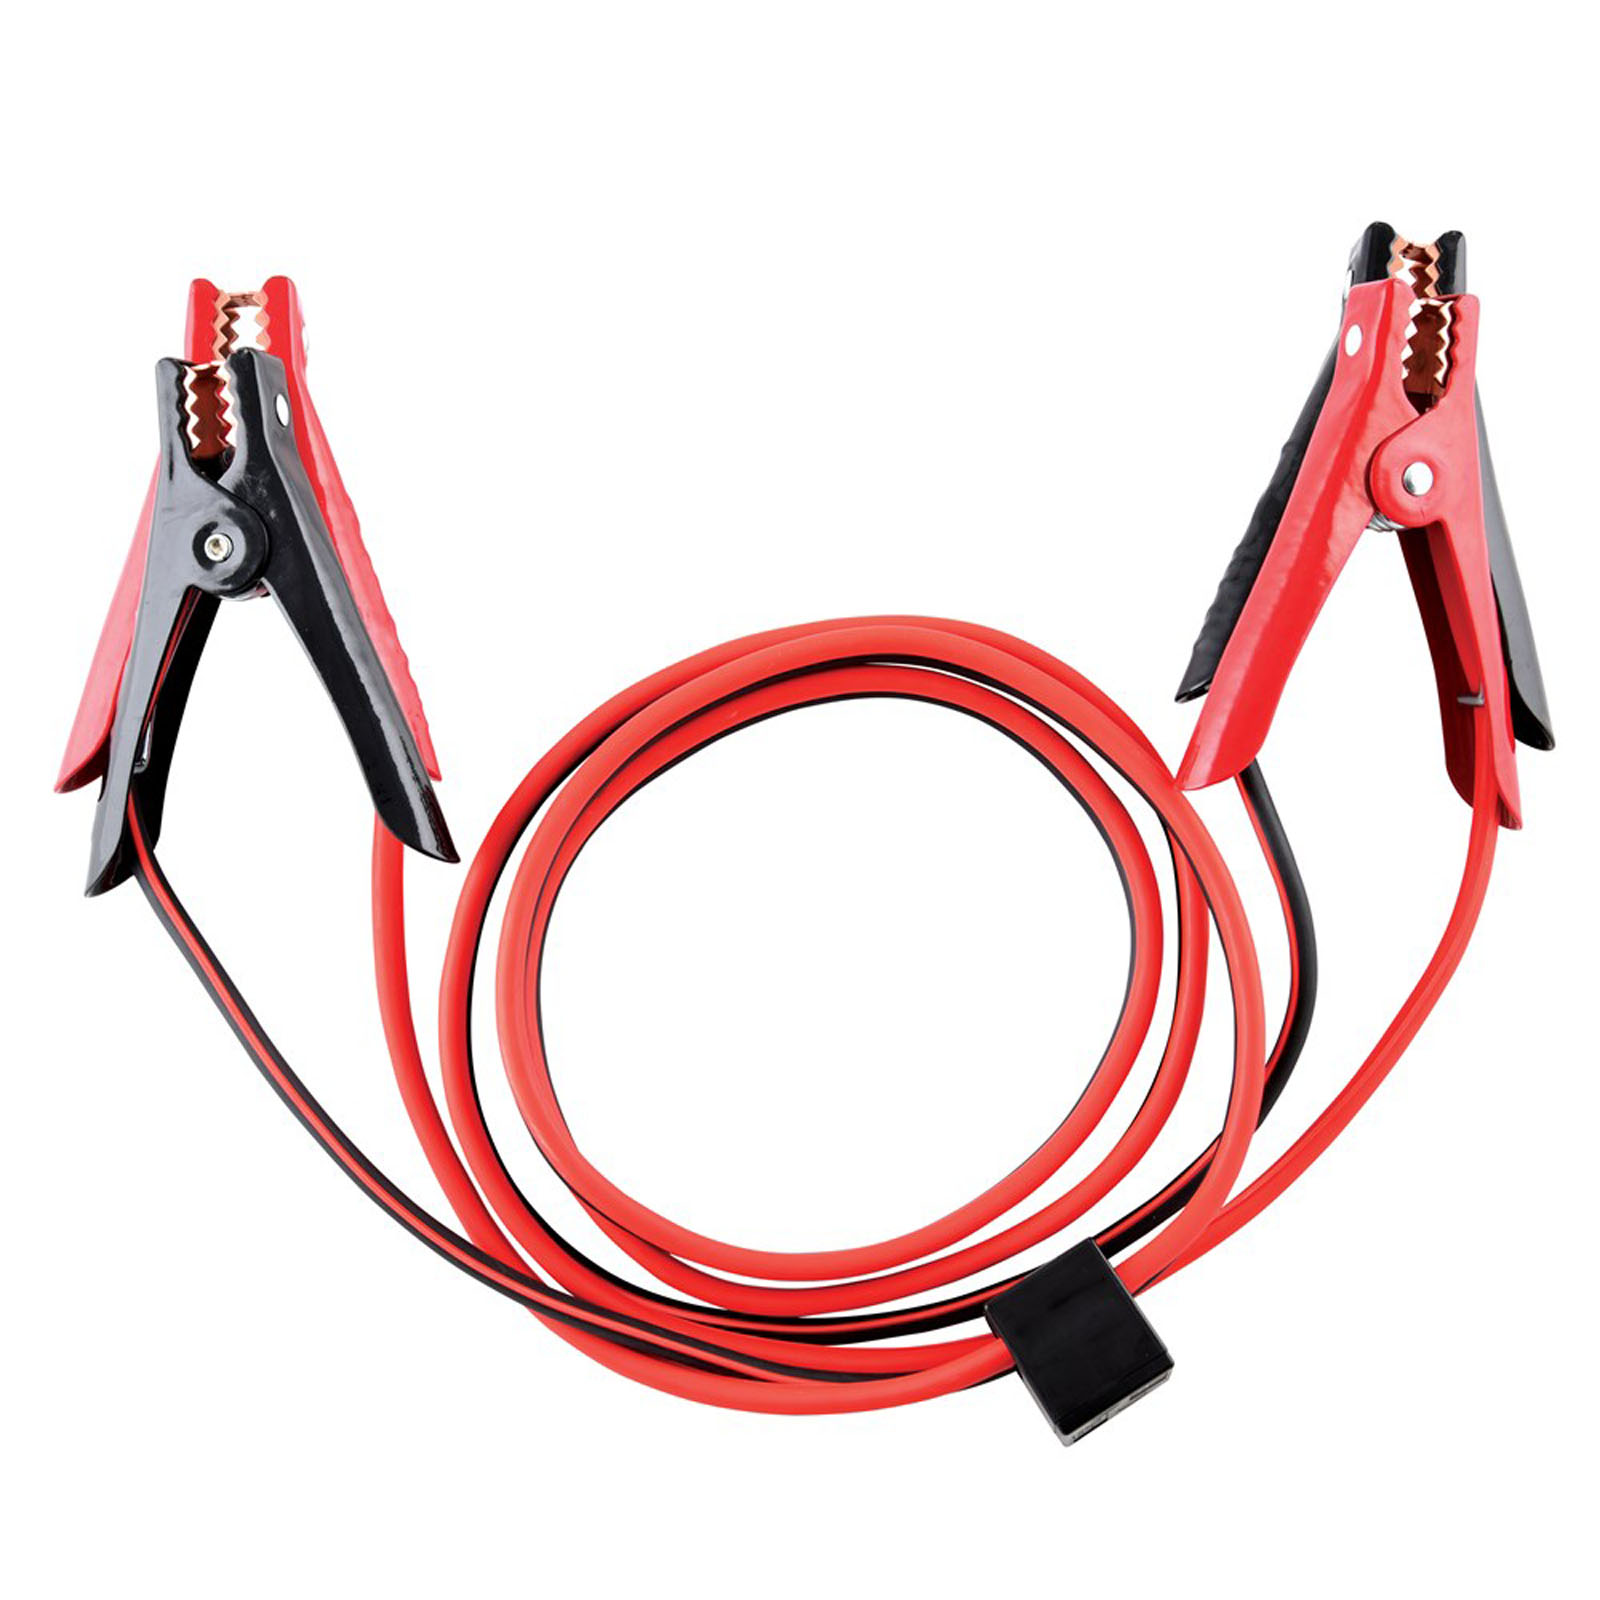 Standard Booster Cables 100 AMP 